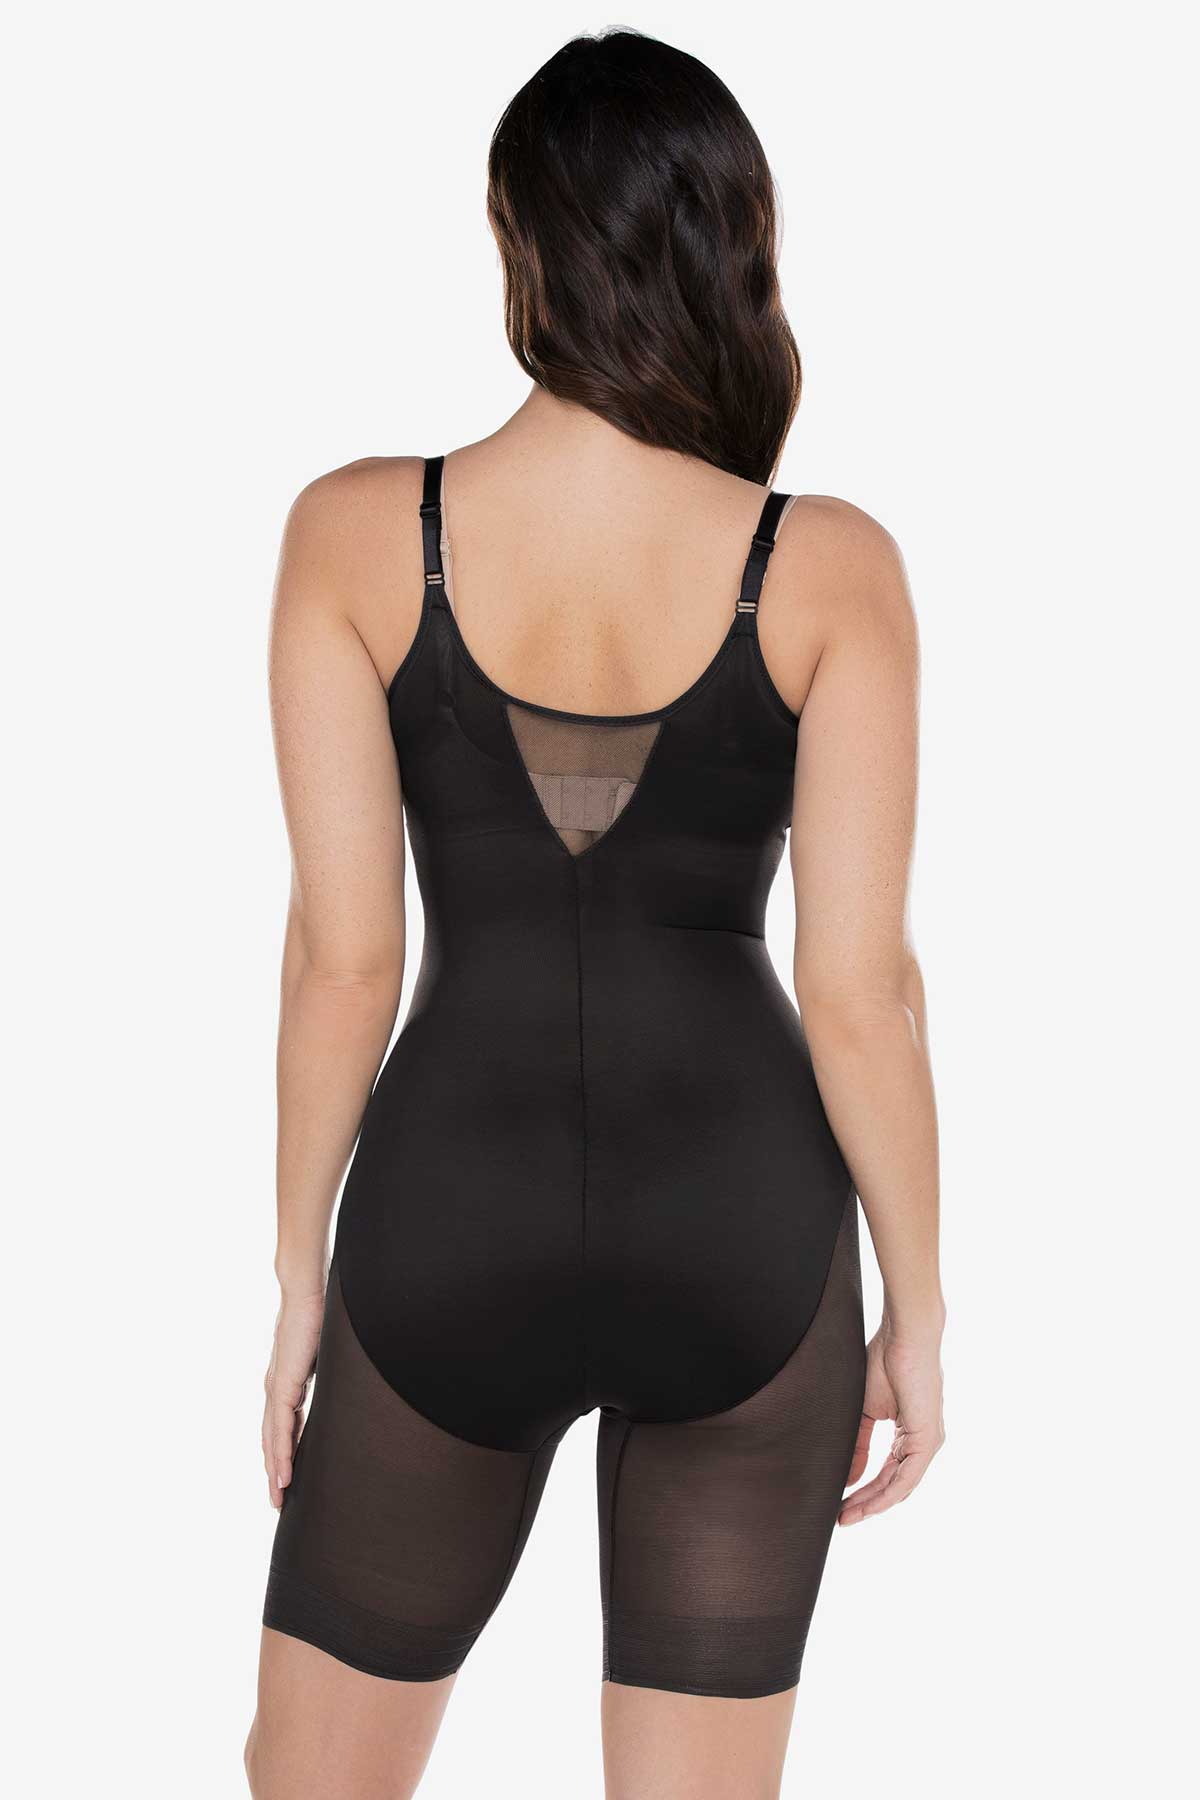 Miraclesuit Extra Firm Control Strapless Body Shaper 2793 in Black